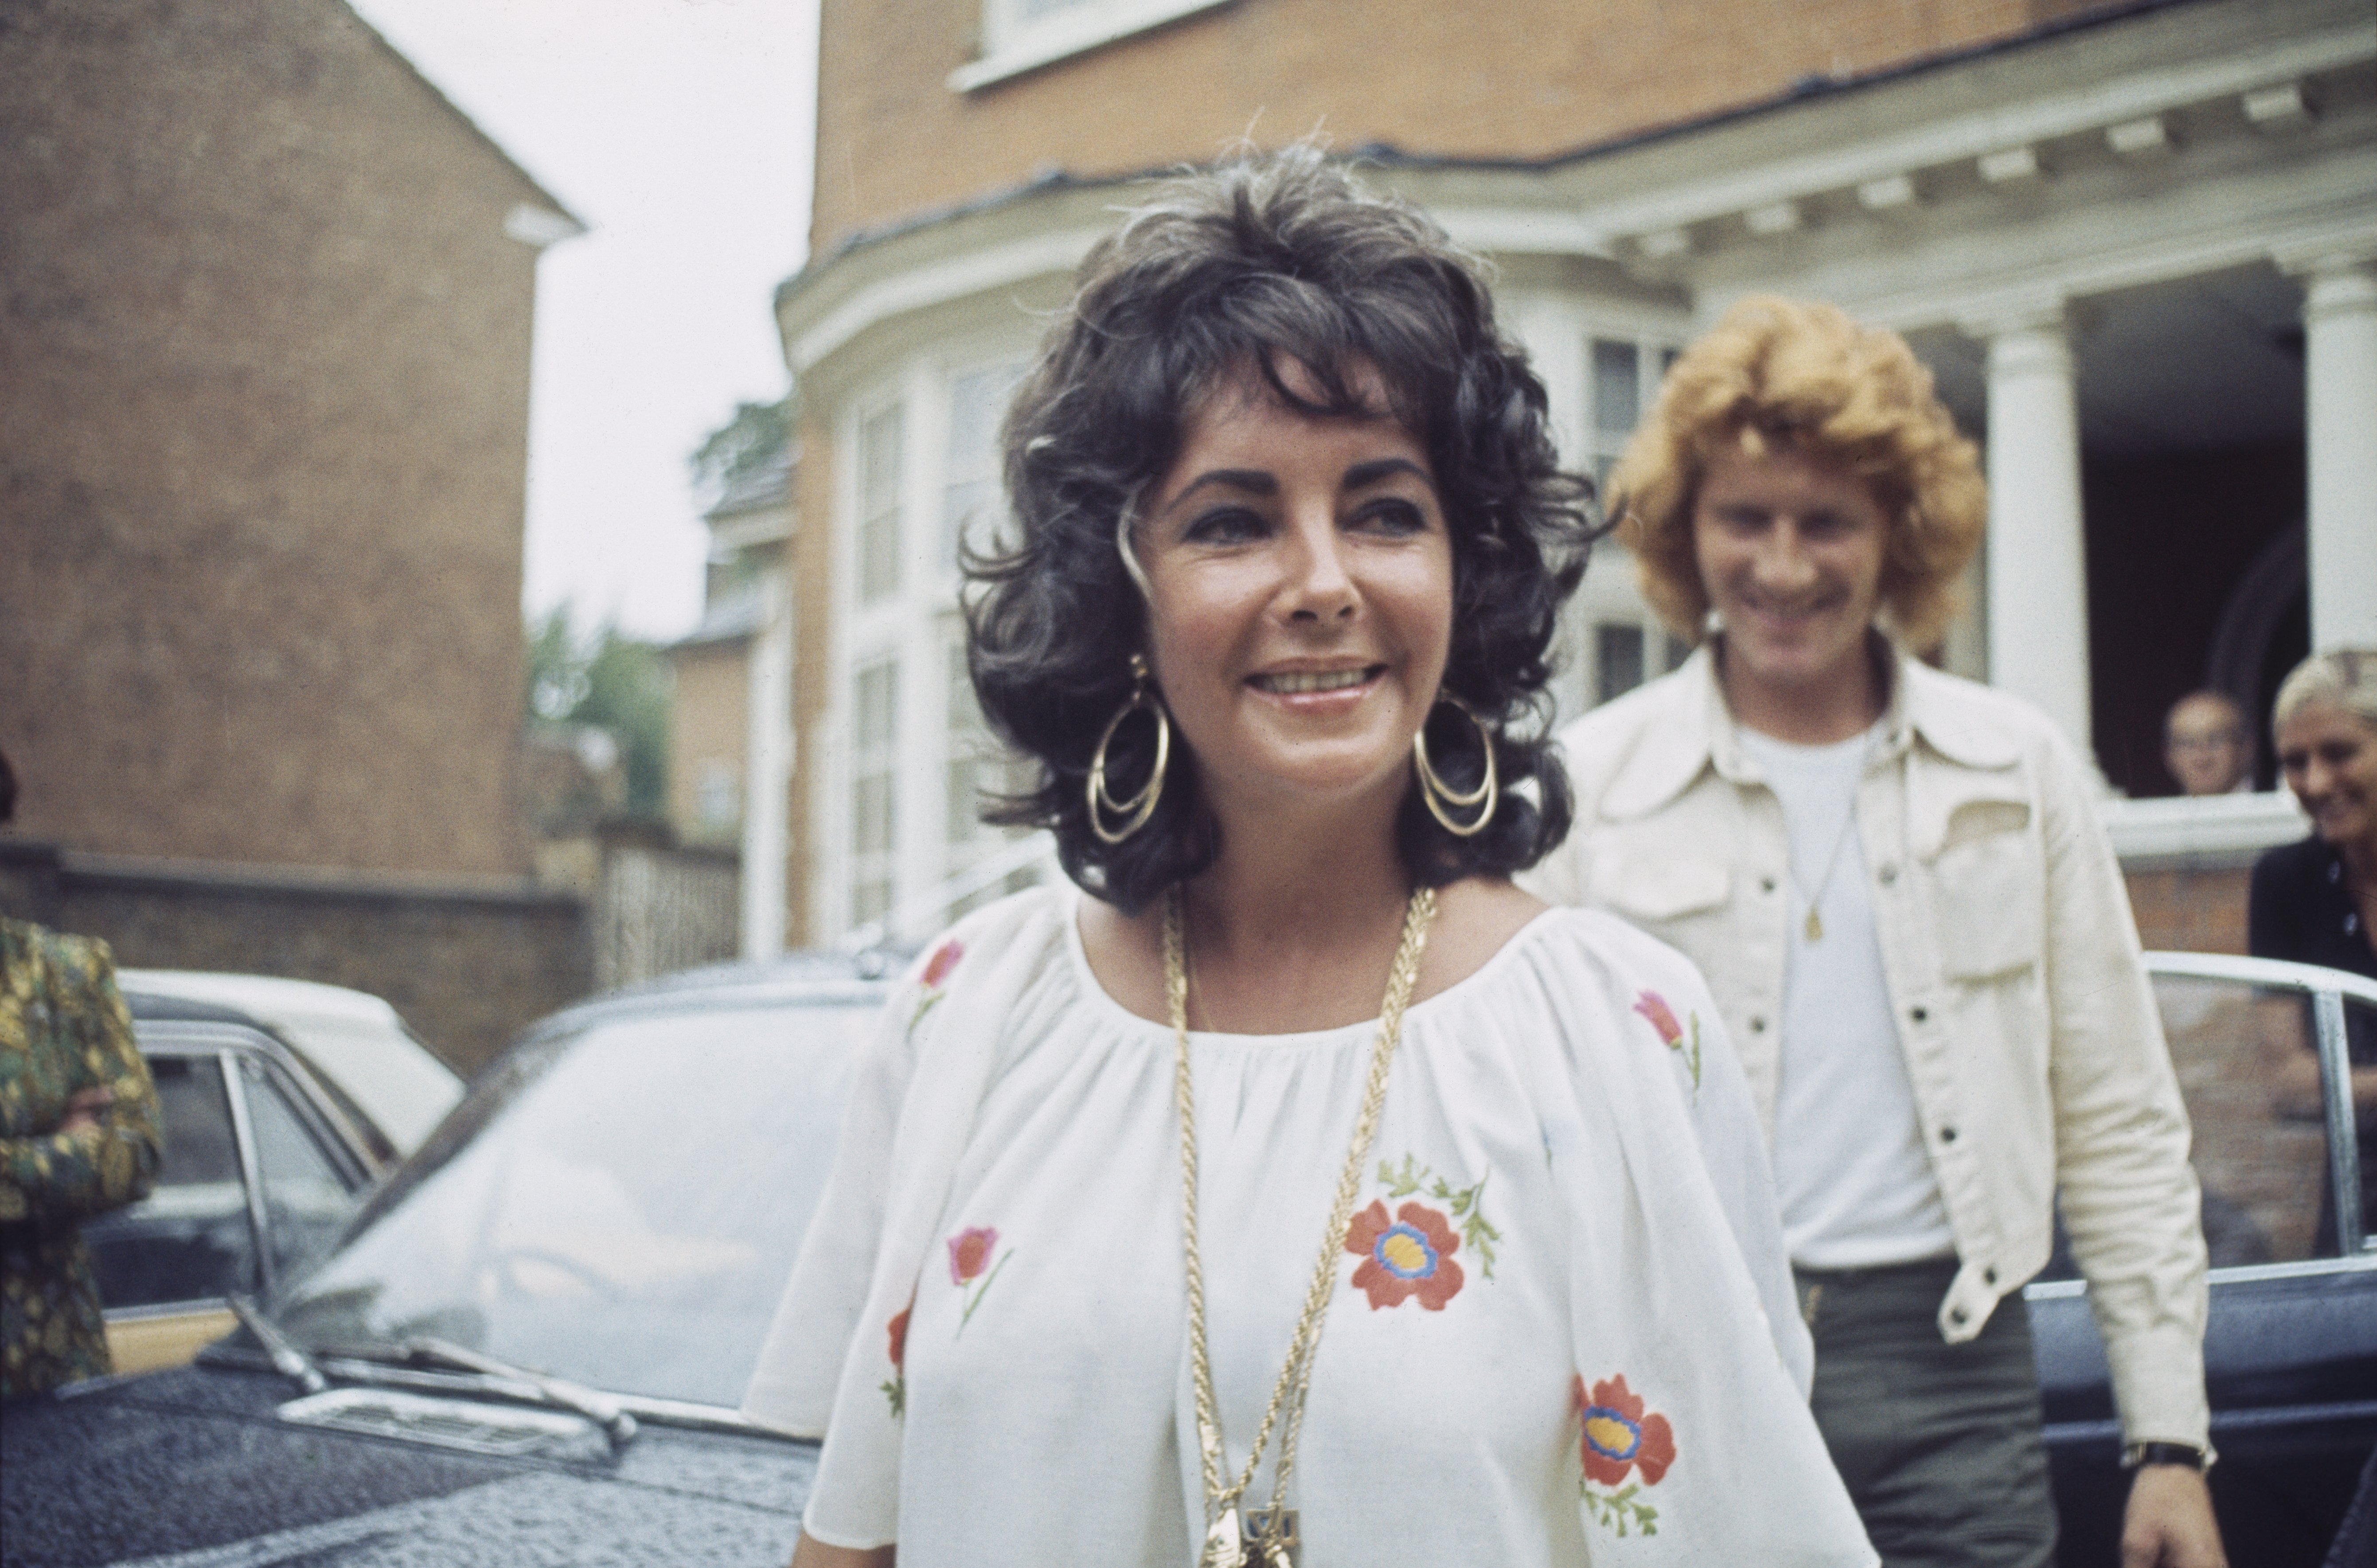 Elizabeth Taylor in London on 29th July 1971 | Source: Getty Images